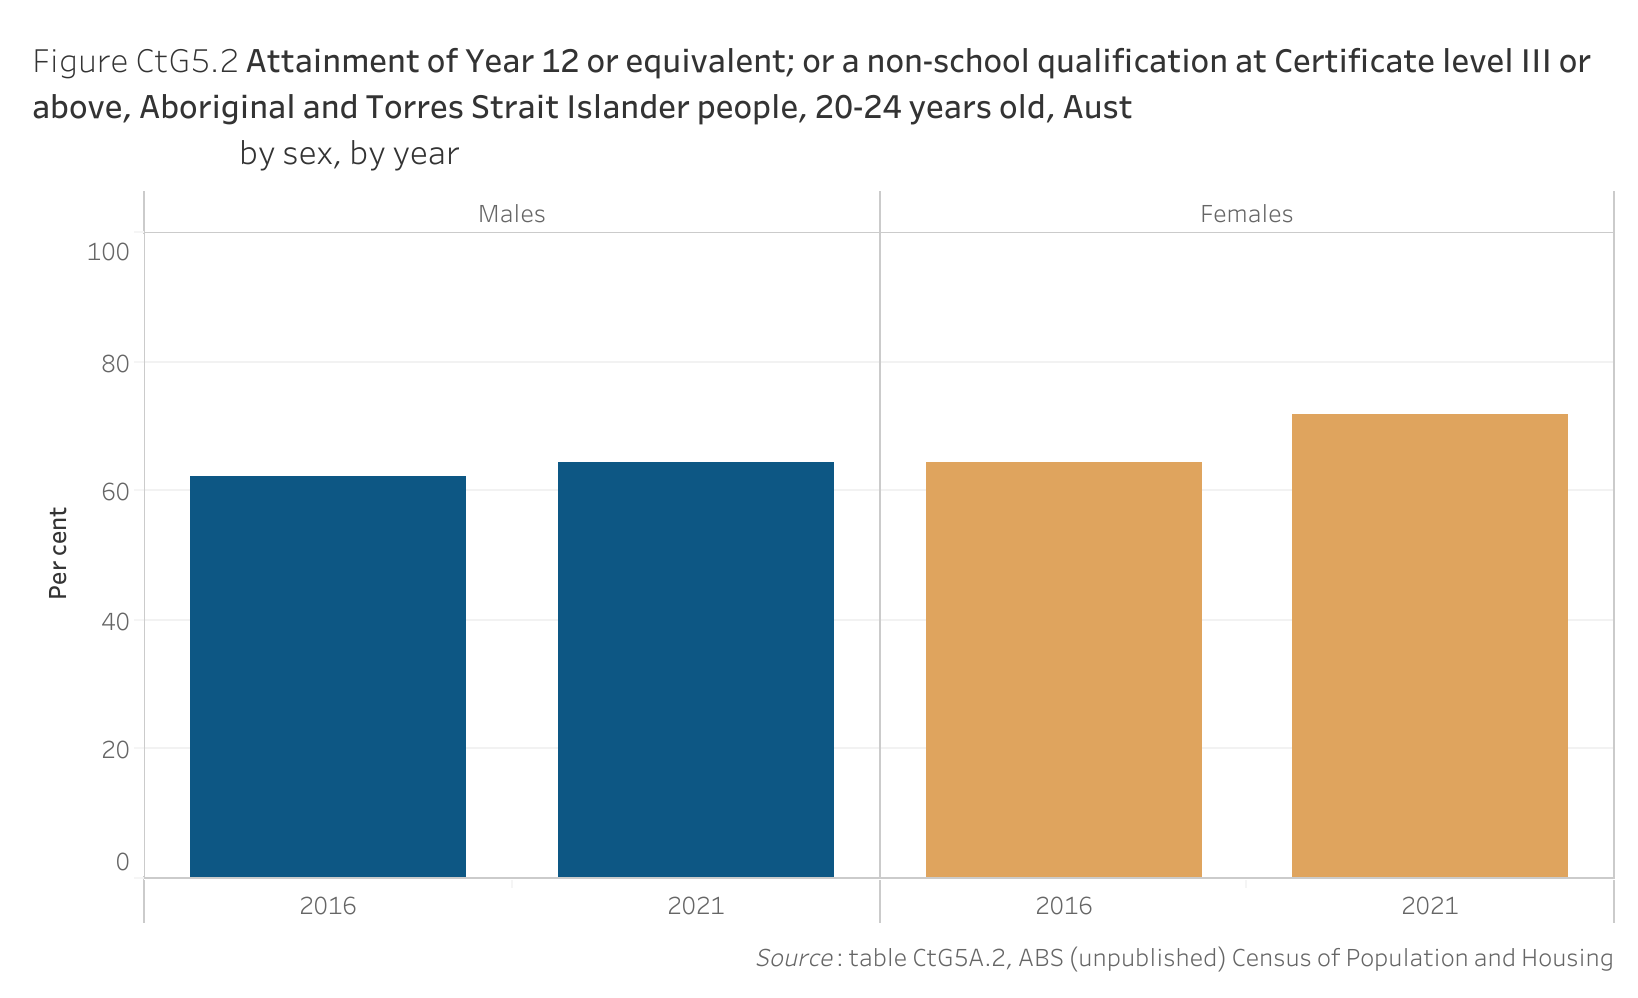 Figure CtG5.2 shows the attainment of Year 12 or equivalent; or a non-school qualification at Certificate level III or above, Aboriginal and Torres Strait Islander people, 20-24 years old, Australia, by sex, by year. More details can be found within the text near this image.